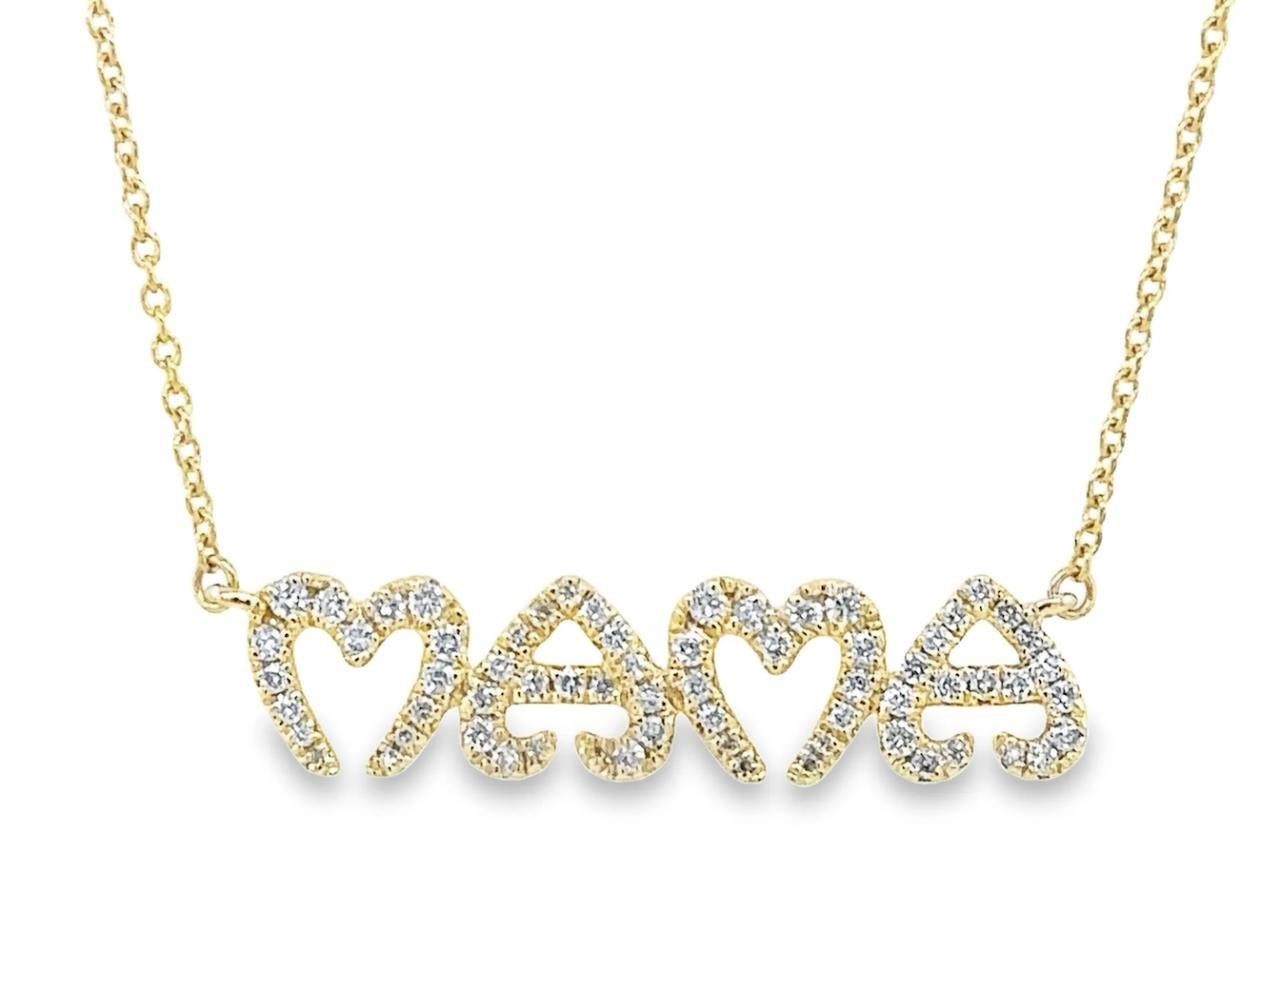 Necklace Information
Diamond Type : Natural Diamond
Metal : 14k
Metal Color : Yellow Gold
Dimensions : 6MM H
Diamond Carat Weight : 0.20ttcw
Length : 18 Inches


JEWELRY CARE
Over the course of time, body oil and skin products can collect on Jewelry